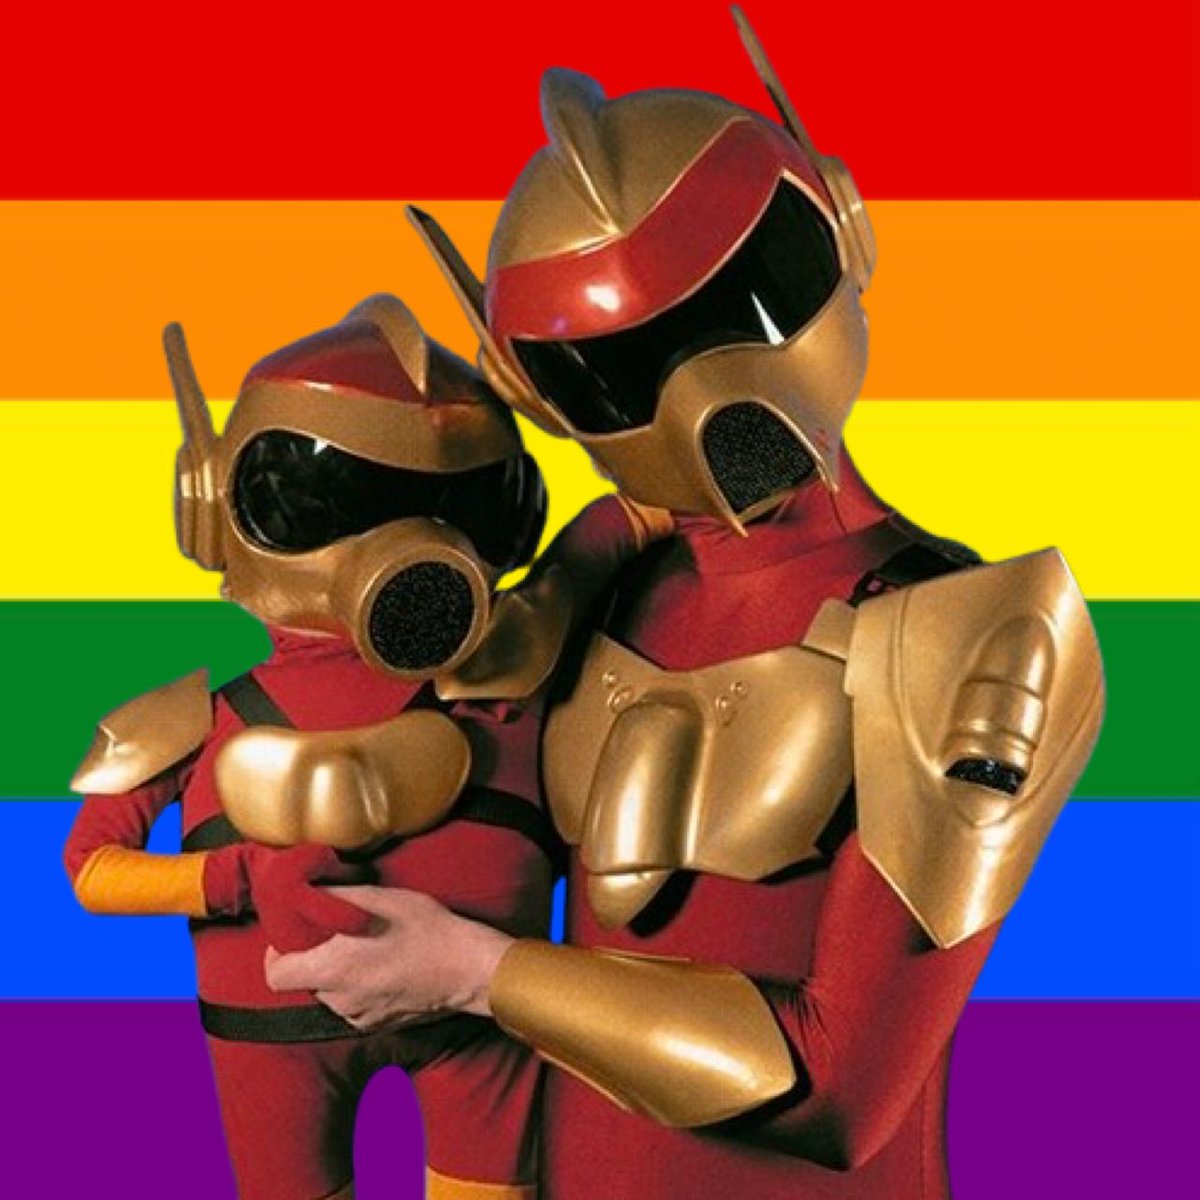 🏳️‍⚧️🏳️‍🌈TWRP PRIDE ICONS!!!!!🏳️‍🌈🏳️‍⚧️

🩷❤️🧡💛💚🩵💙💜

free to use!!!! i can also take some requests if there’s a specific picture or flag you’d like!